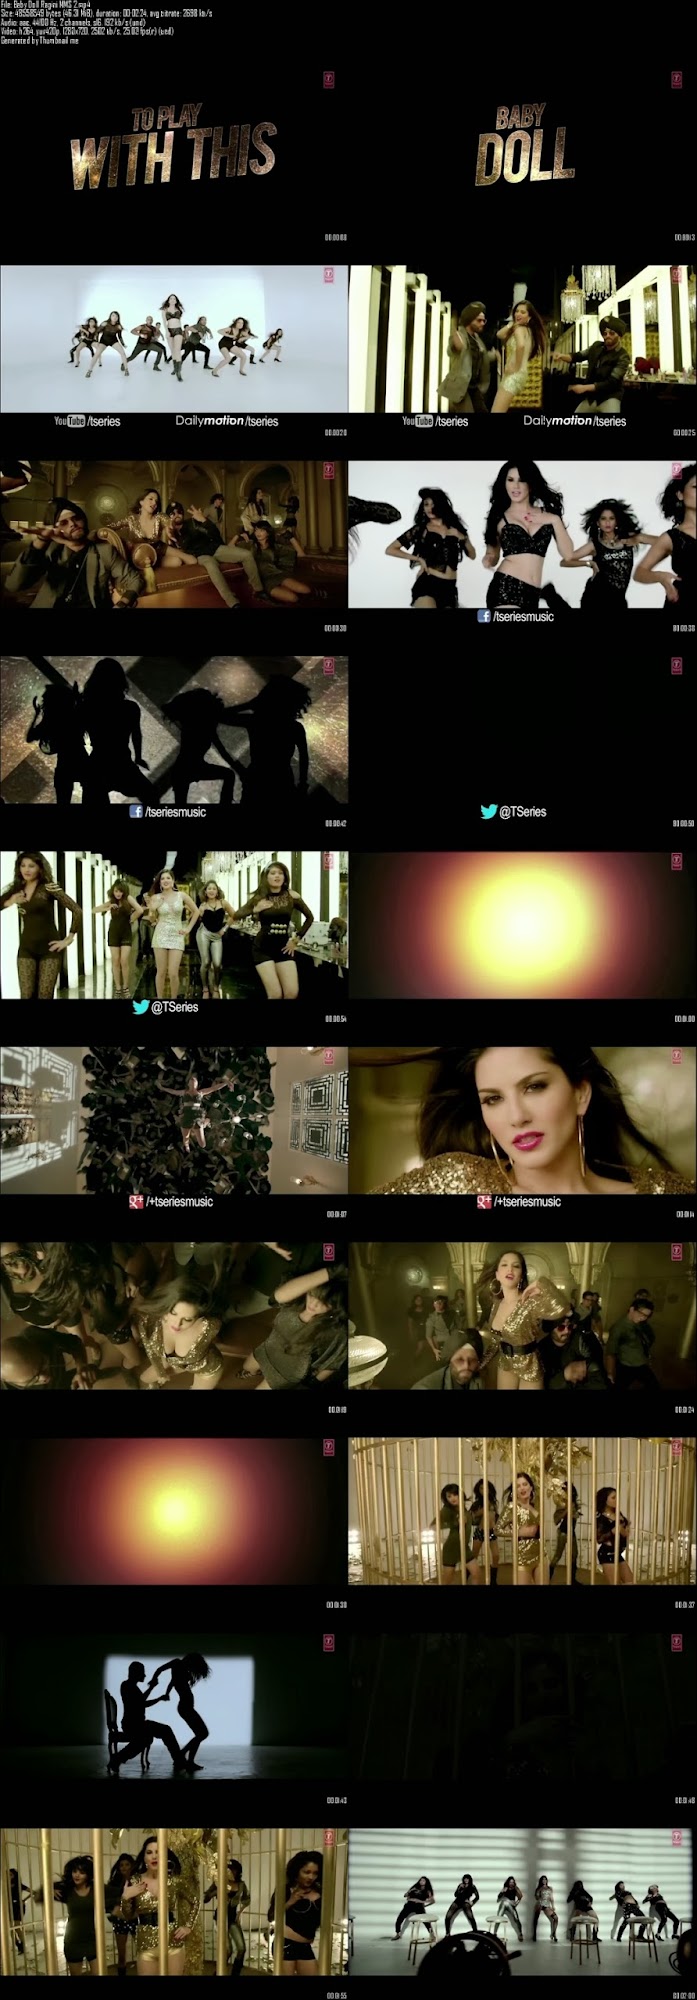 Mediafire Resumable Download Link For Video Song Baby Doll - Ragini MMS 2 (2014)